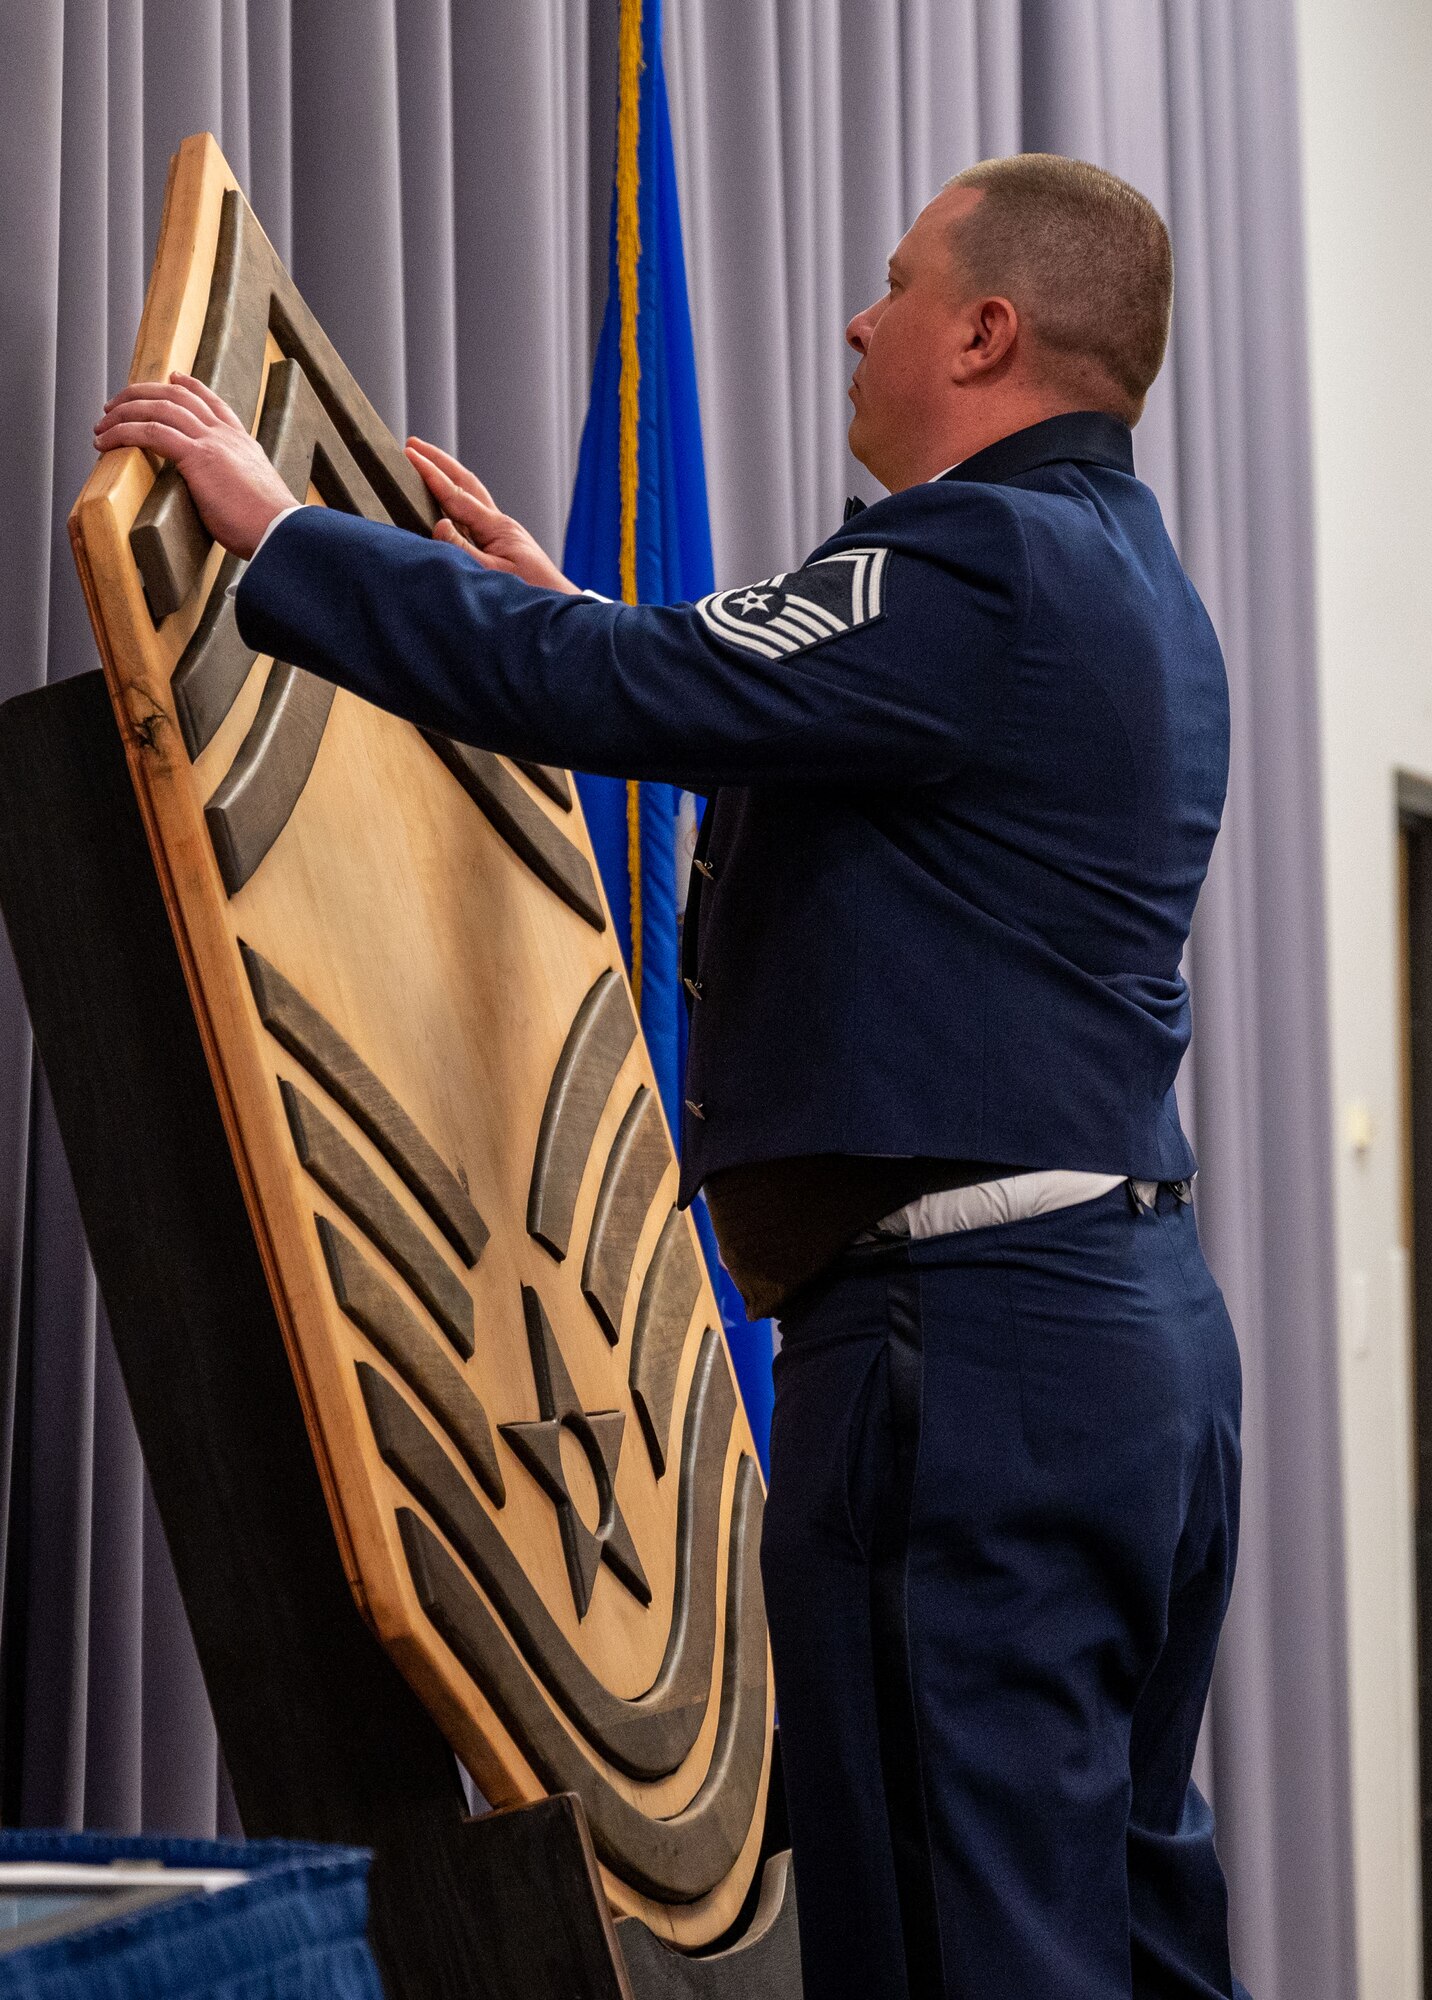 Senior Master Sgt. Ricardo A. Visconti, 436th Logistics Readiness Squadron fuels flight chief, places the final chevron on a wooden cut out of the chief master sergeant rank during the 2022 Chief Induction ceremony at Dover Air Force Base, Delaware, April 2, 2022. The rank of chief master sergeant is the highest enlisted rank in the Air Force, with only one percent of the enlisted force structure reaching it.  (U.S. Air Force photo by Airman 1st Class Cydney Lee)